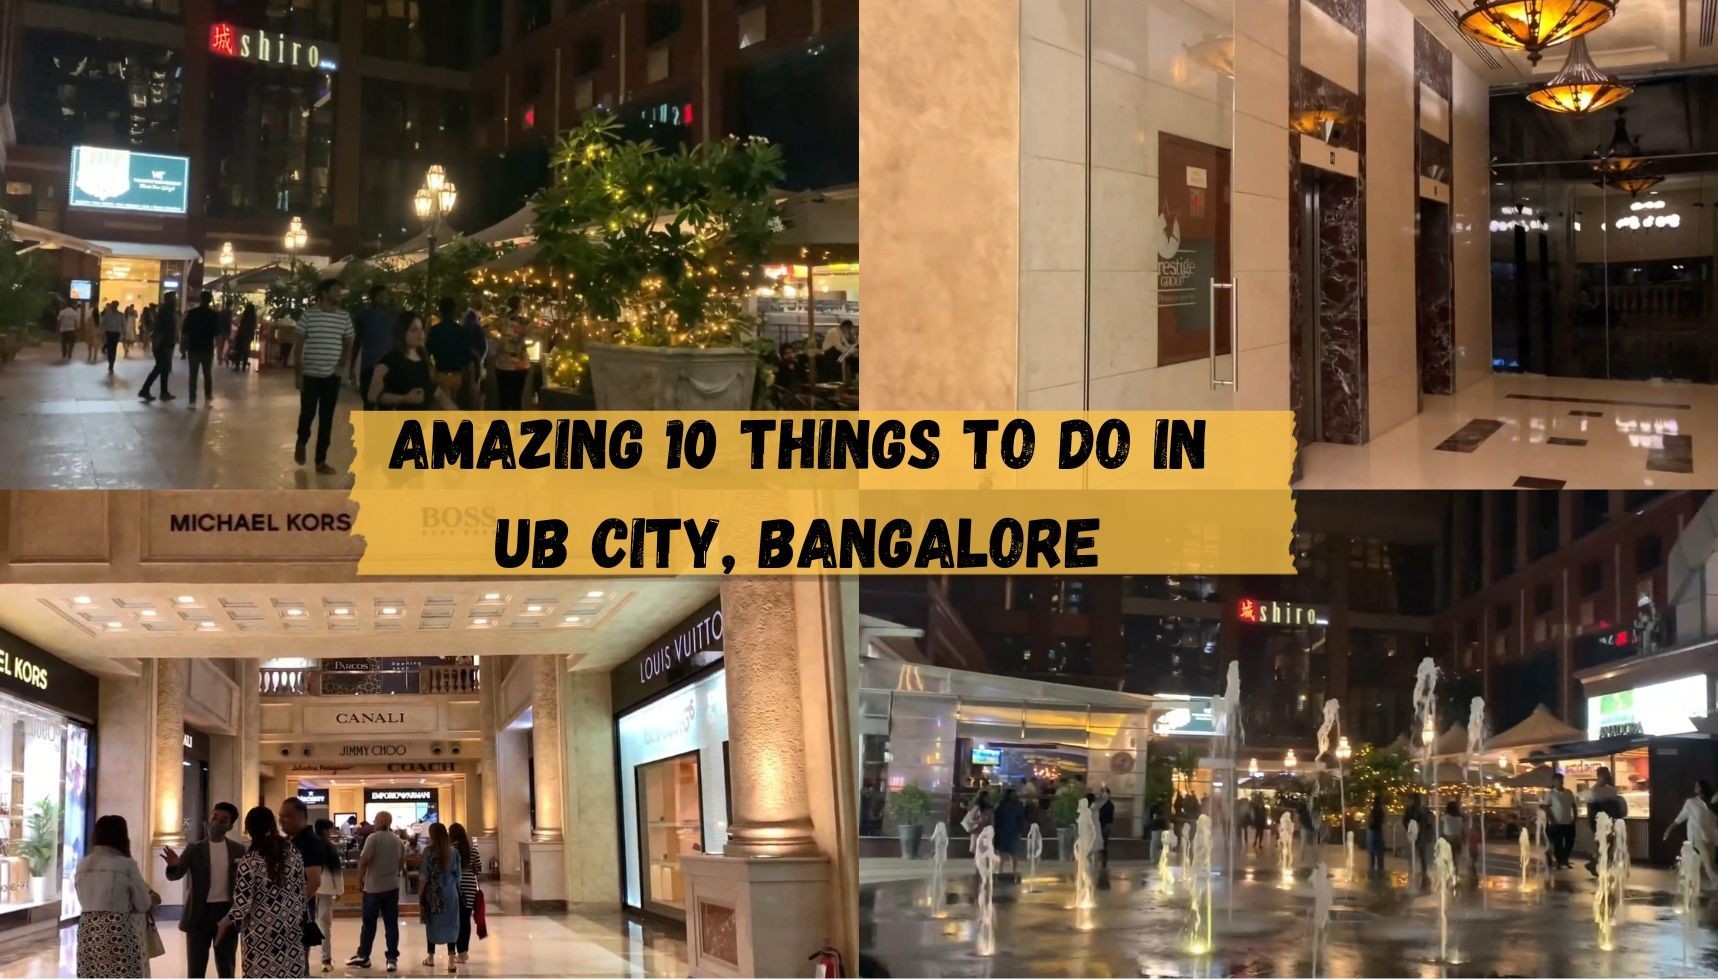 Ultimate Guide: 10 Amazing Things to Do in UB City, Bangalore